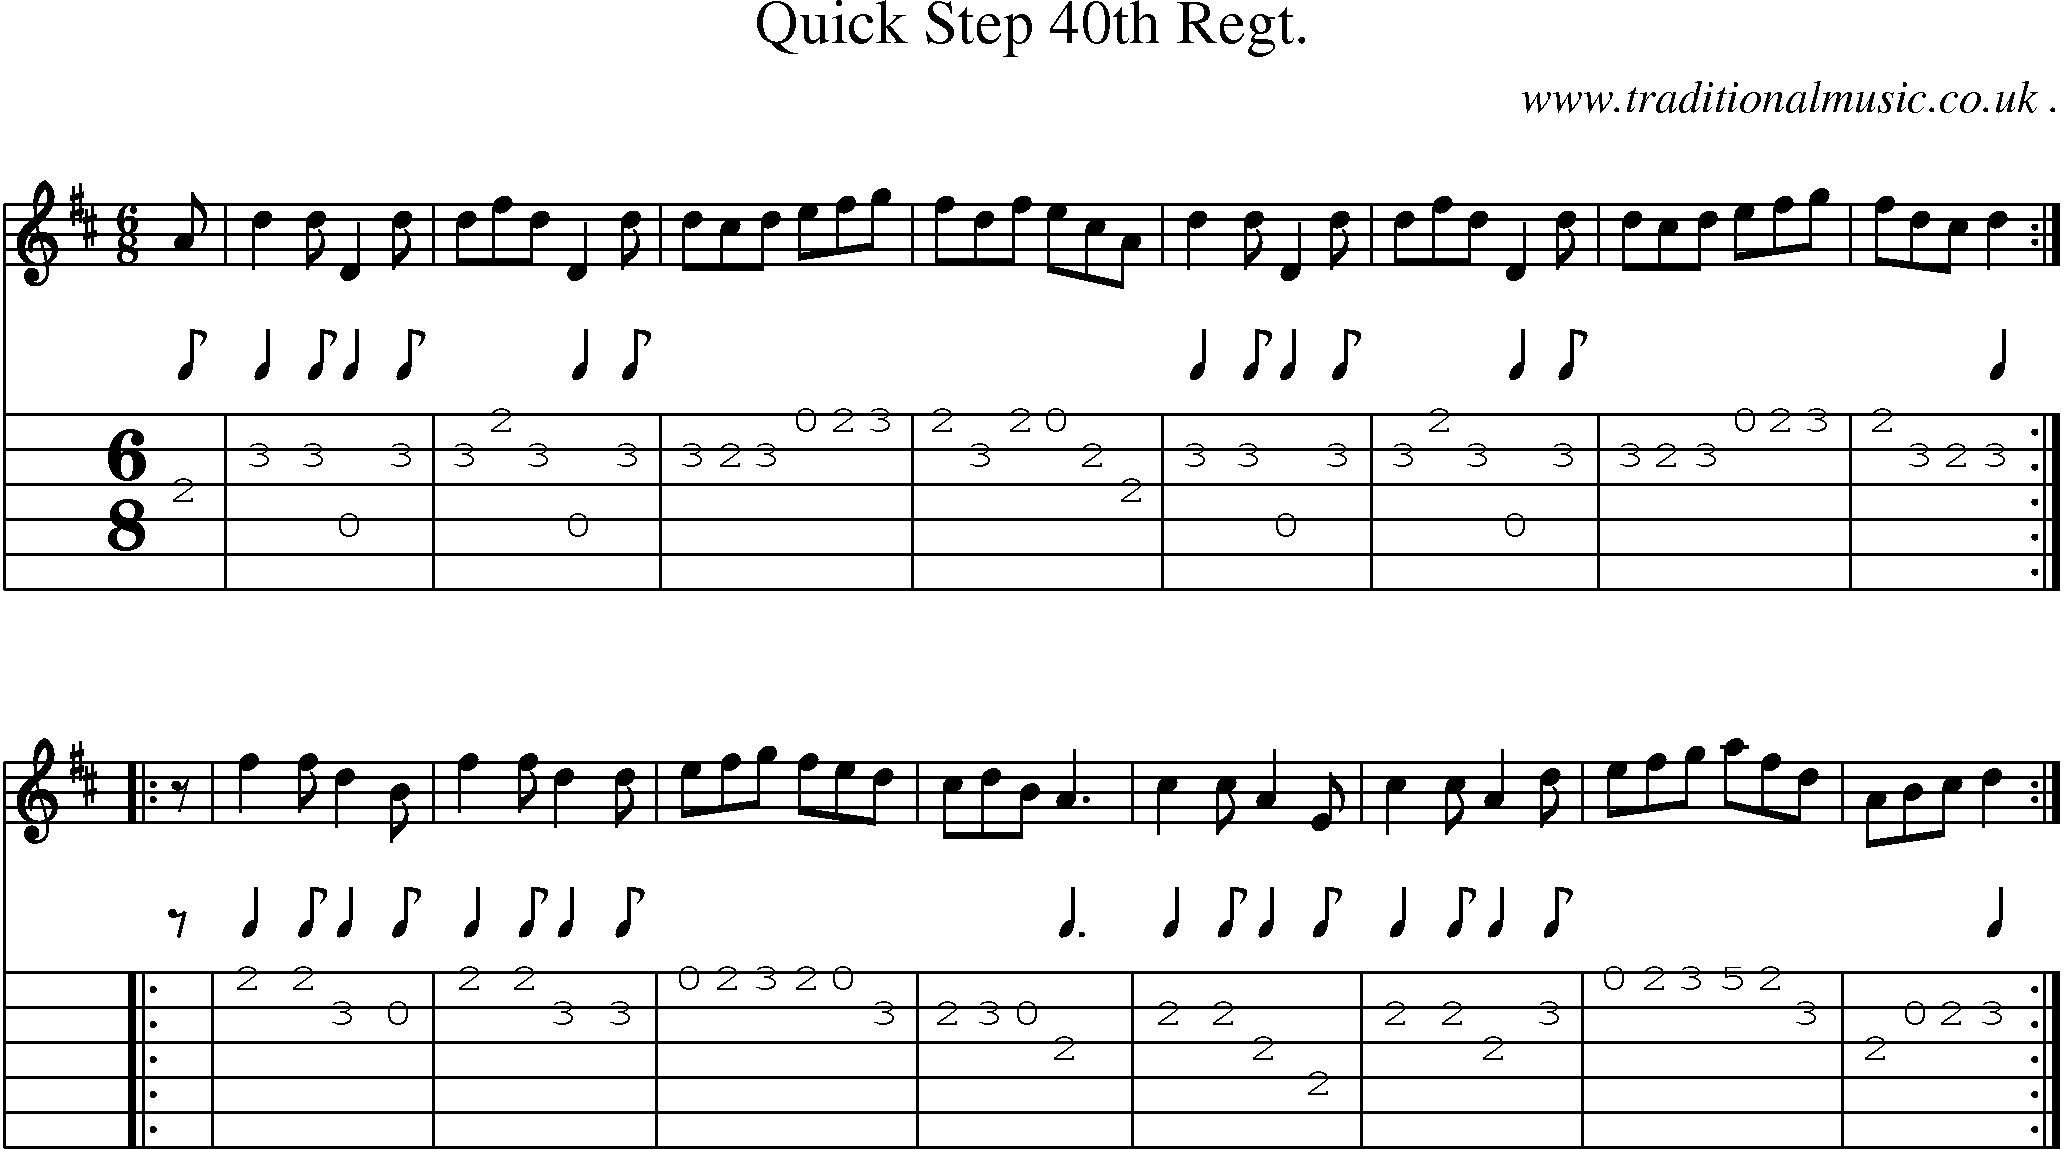 Sheet-music  score, Chords and Guitar Tabs for Quick Step 40th Regt